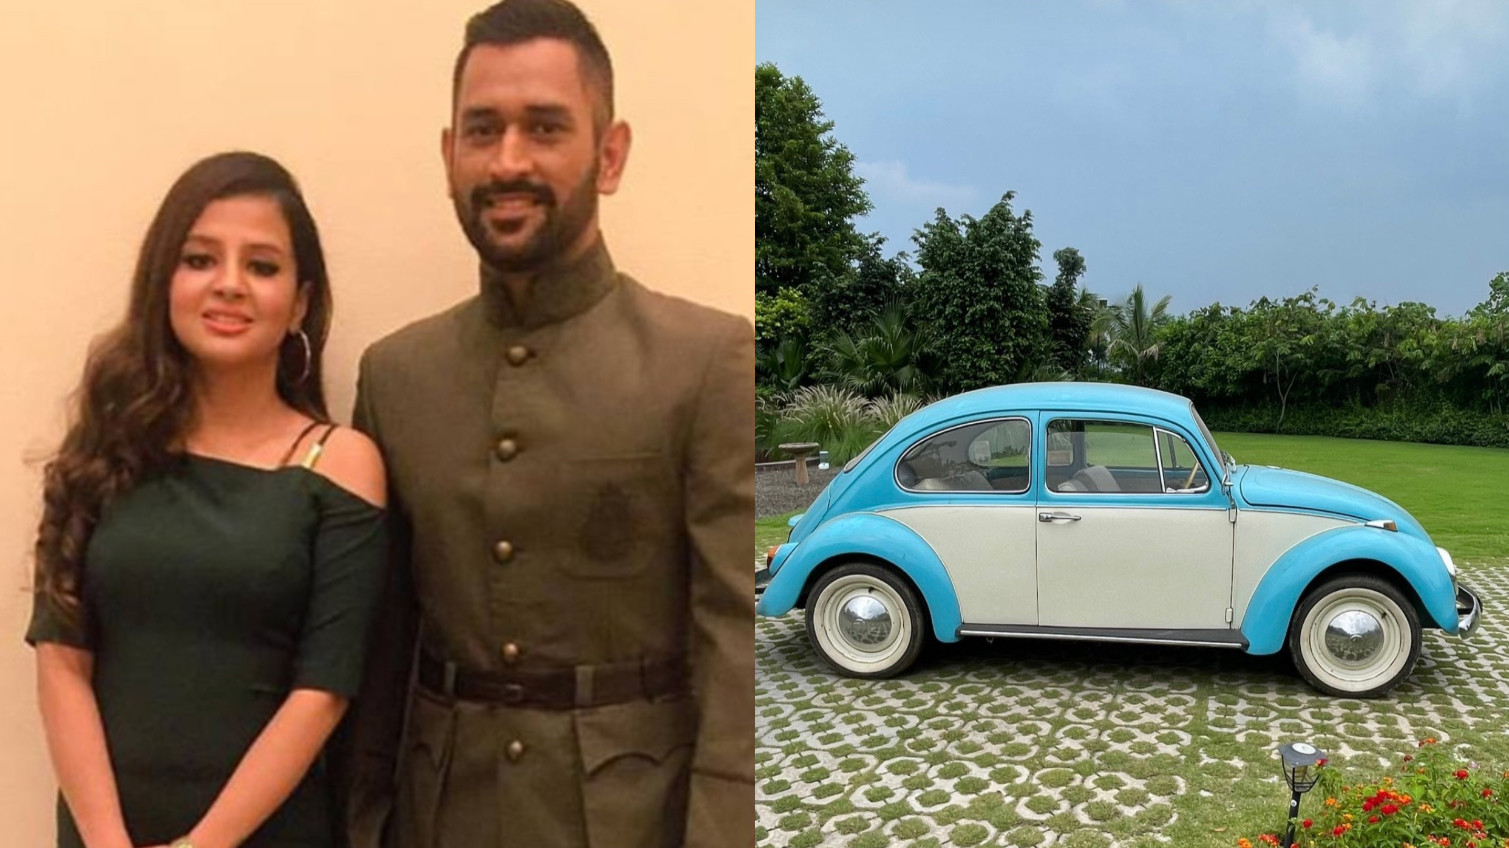 MS Dhoni gifts a vintage car to Sakshi on wedding anniversary